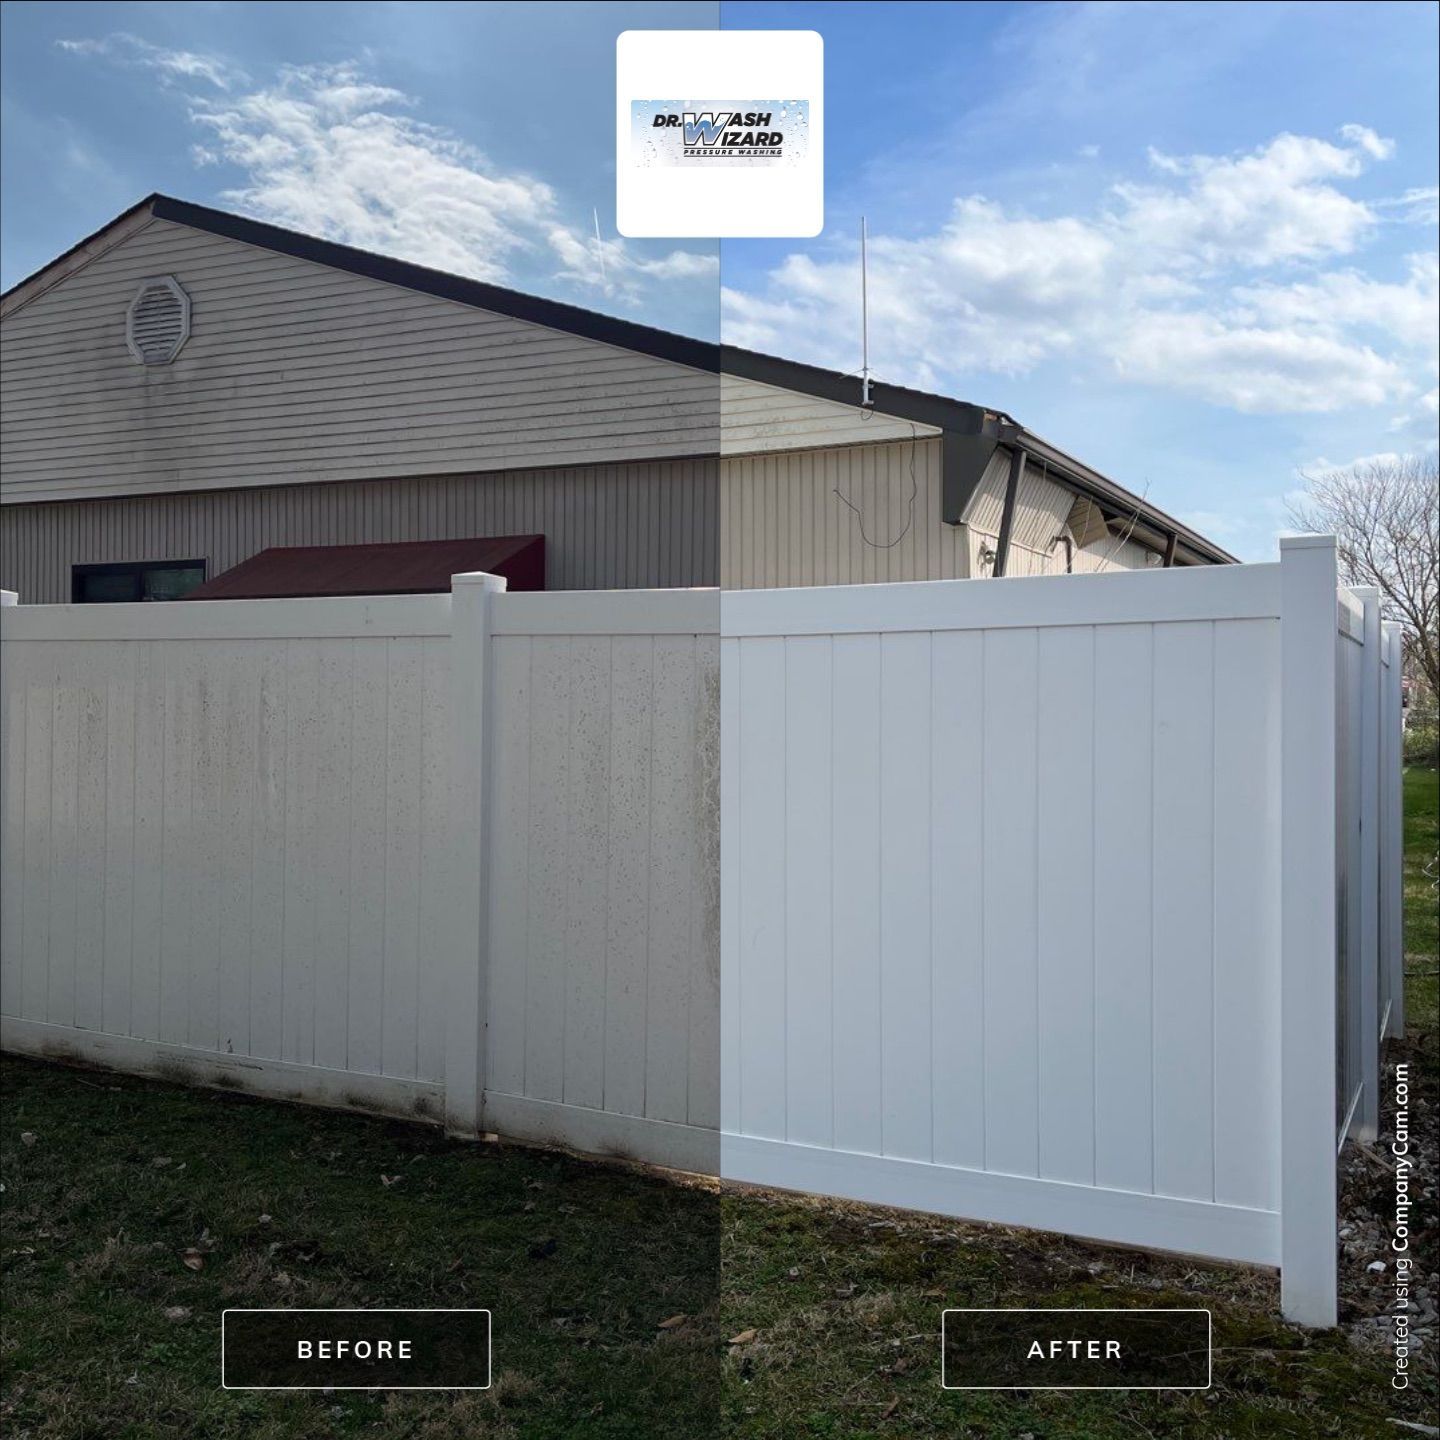 Dr. Wash Wizard: Florissant, Mo Vinyl Fence Time-Traveling Makeover! Thumbnail